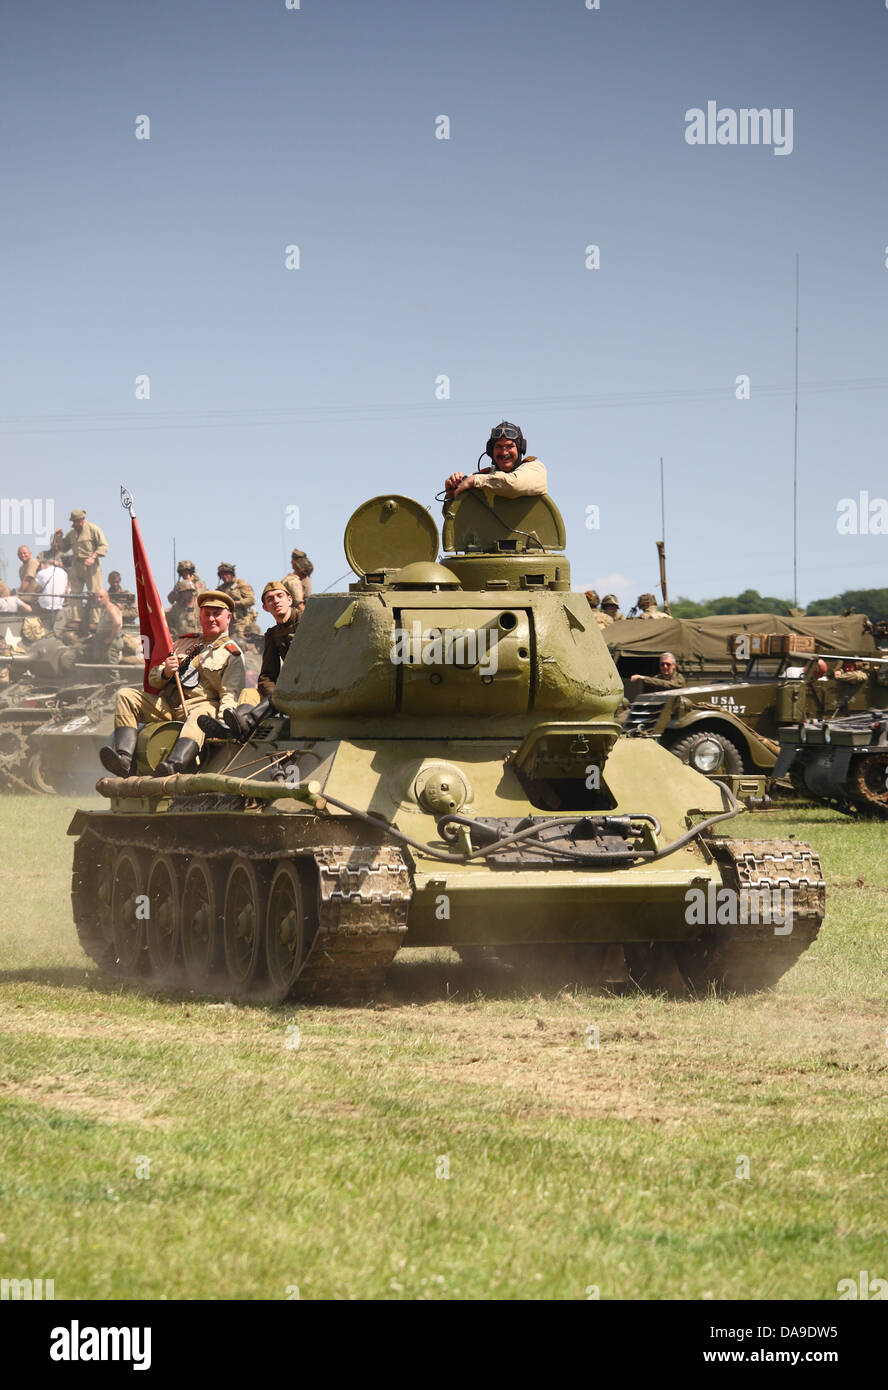 Russian T 34 tank at WW2 re enactment Stock Photo